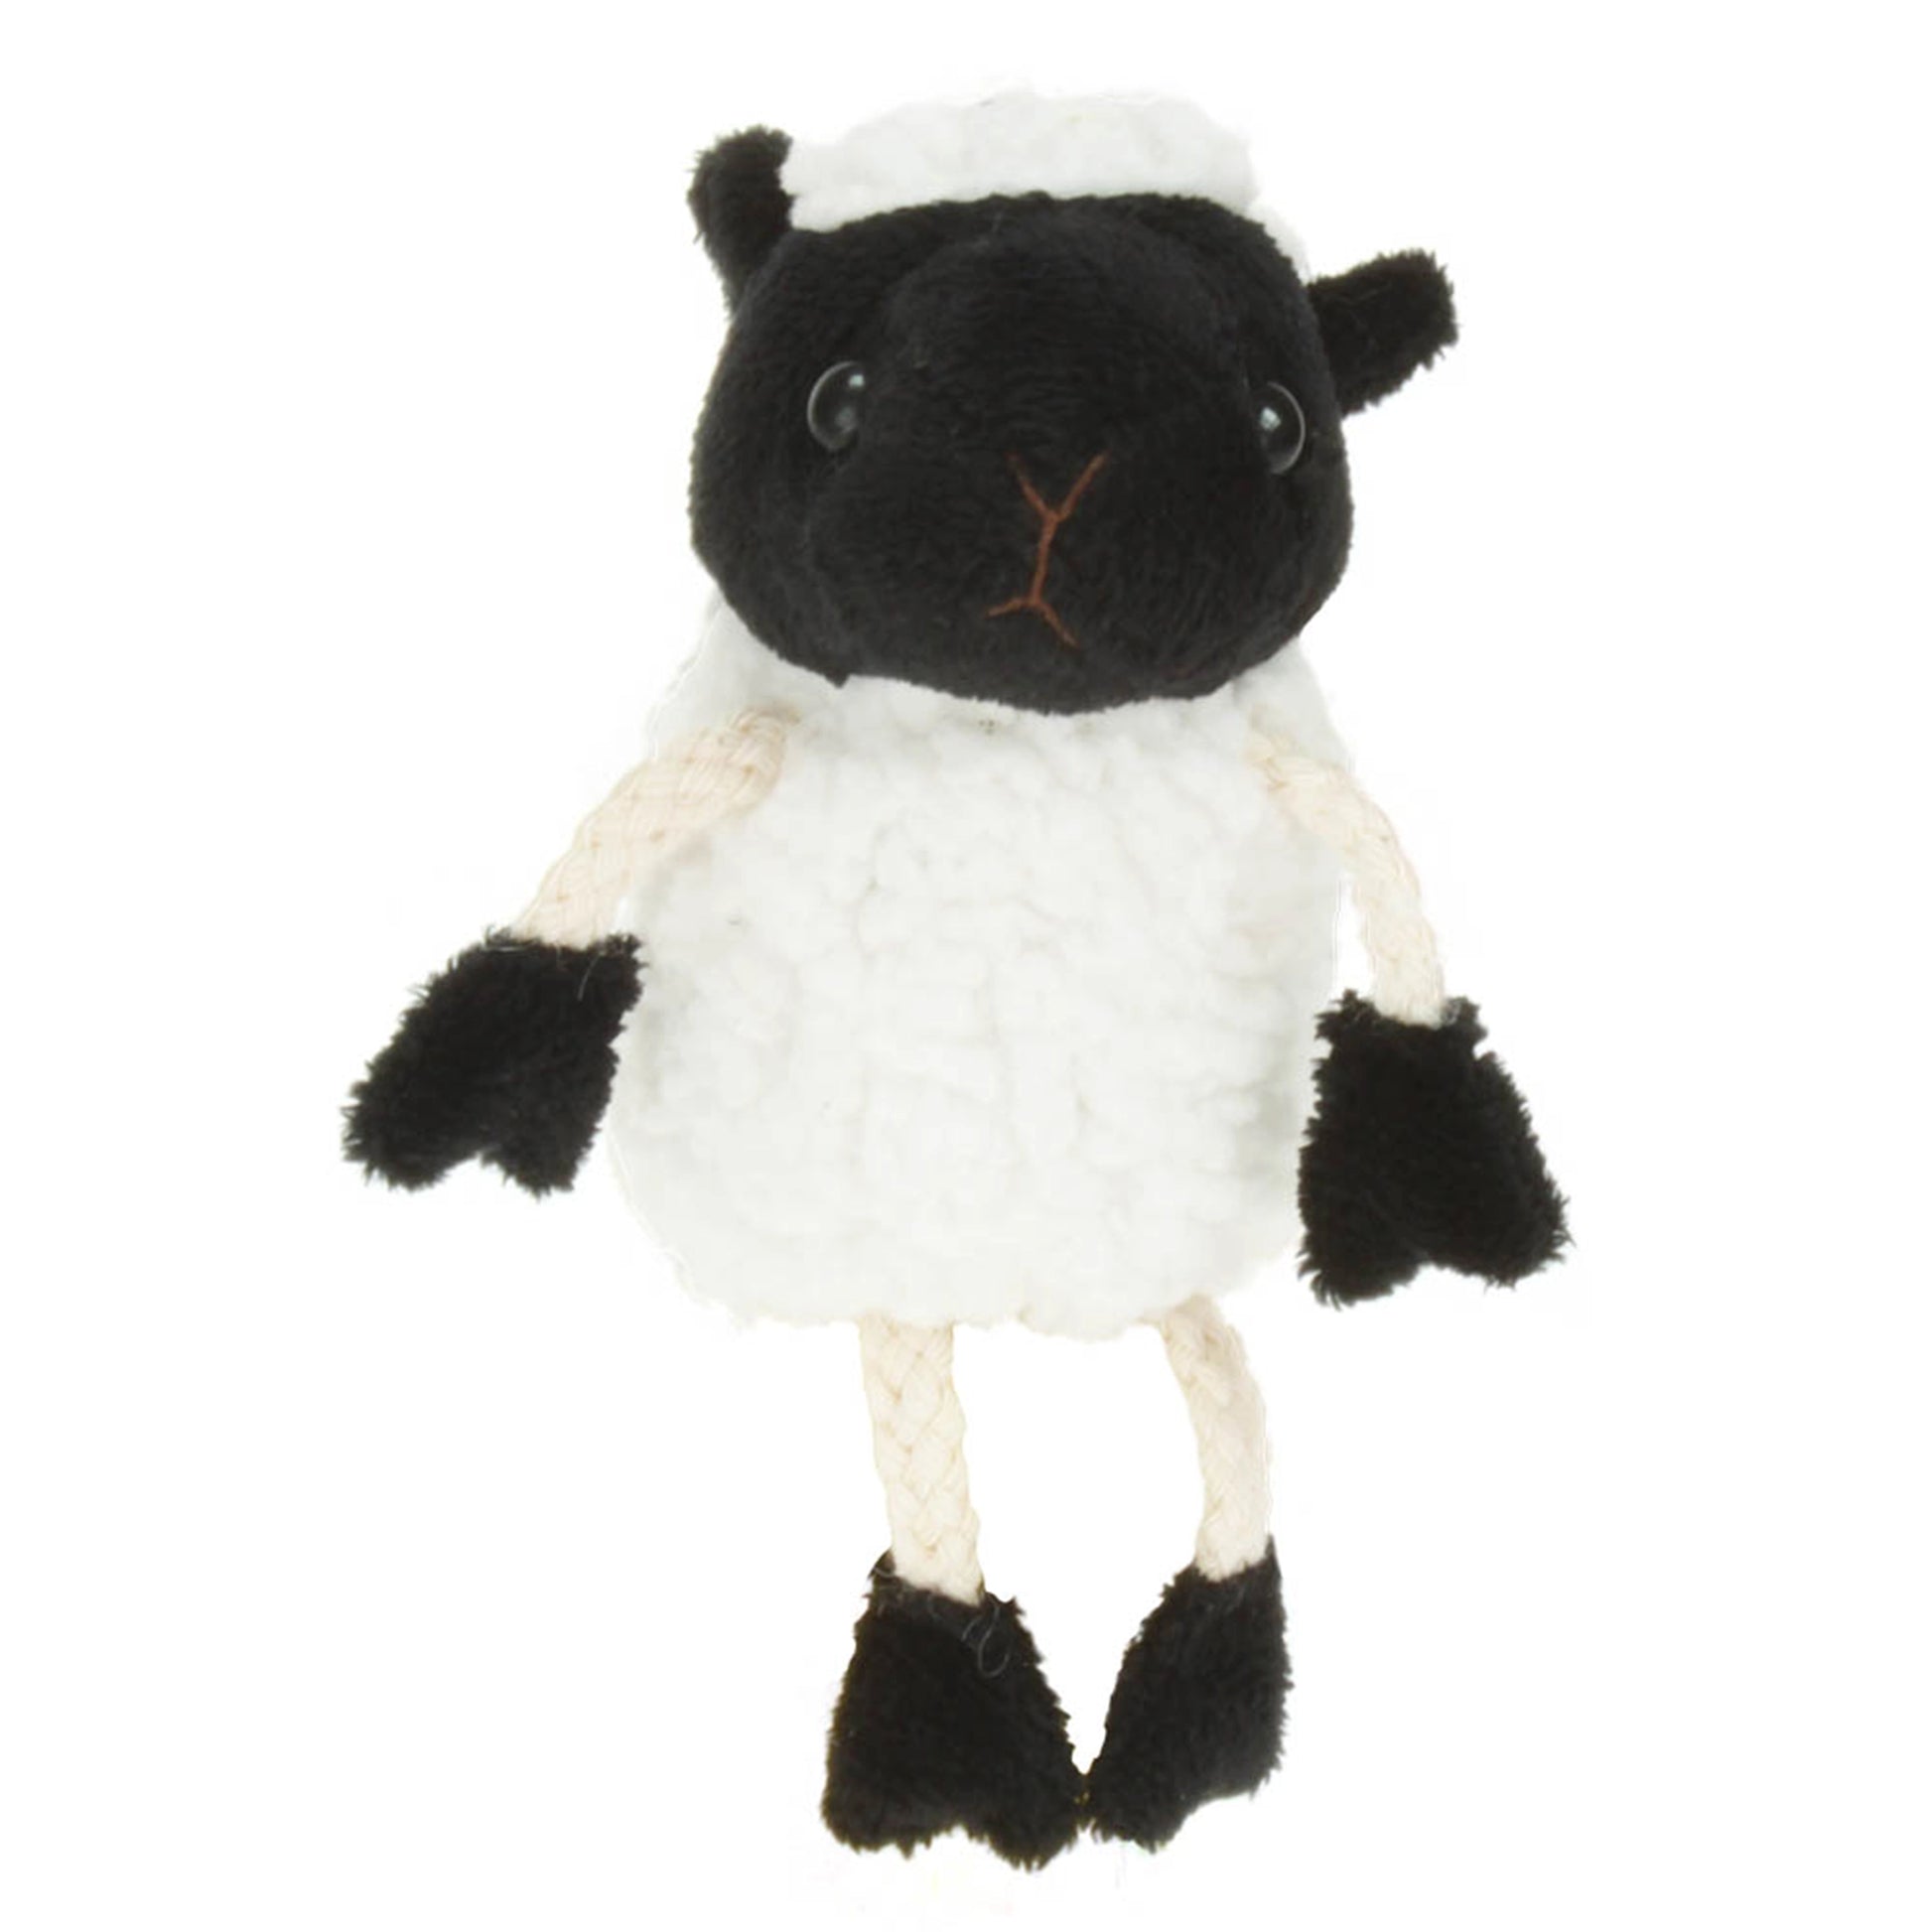 Sheep Finger Puppet - The Puppet Company - The Forgotten Toy Shop